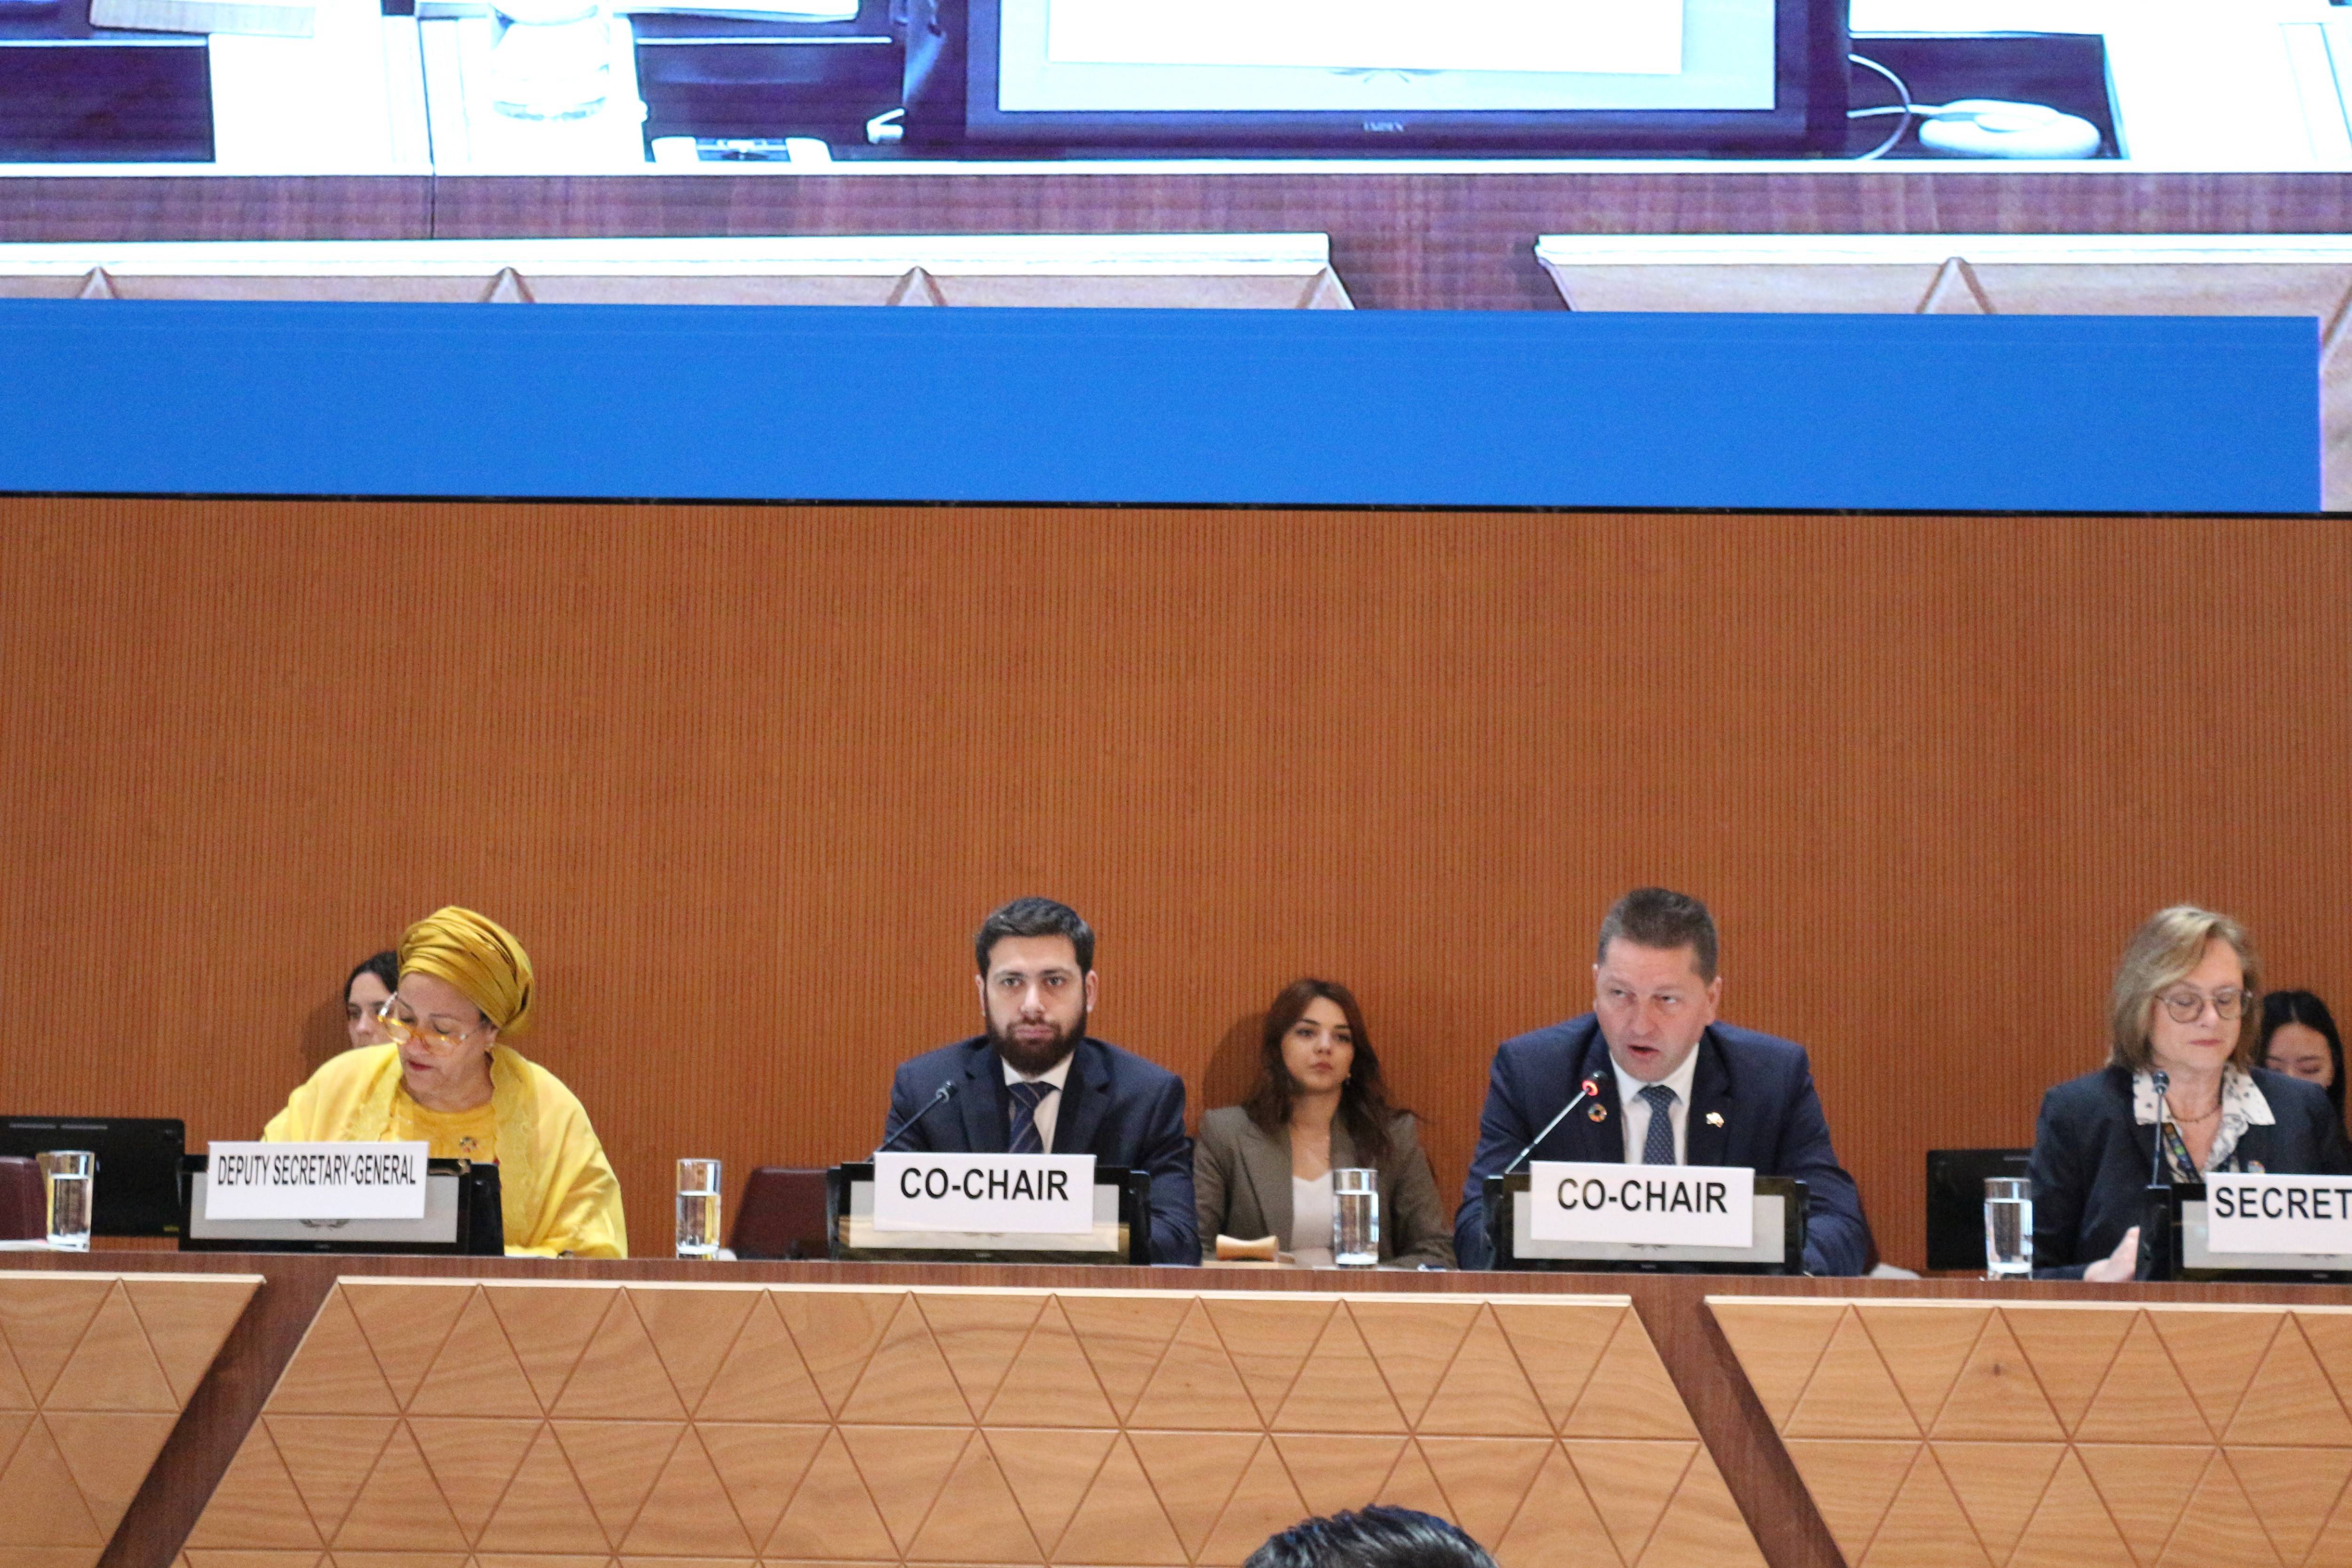 Remarks by the Deputy Foreign Minister of Armenia Vahan Kostanyan at the High-level Policy Segment of the UNECE Regional Forum on Sustainable Development